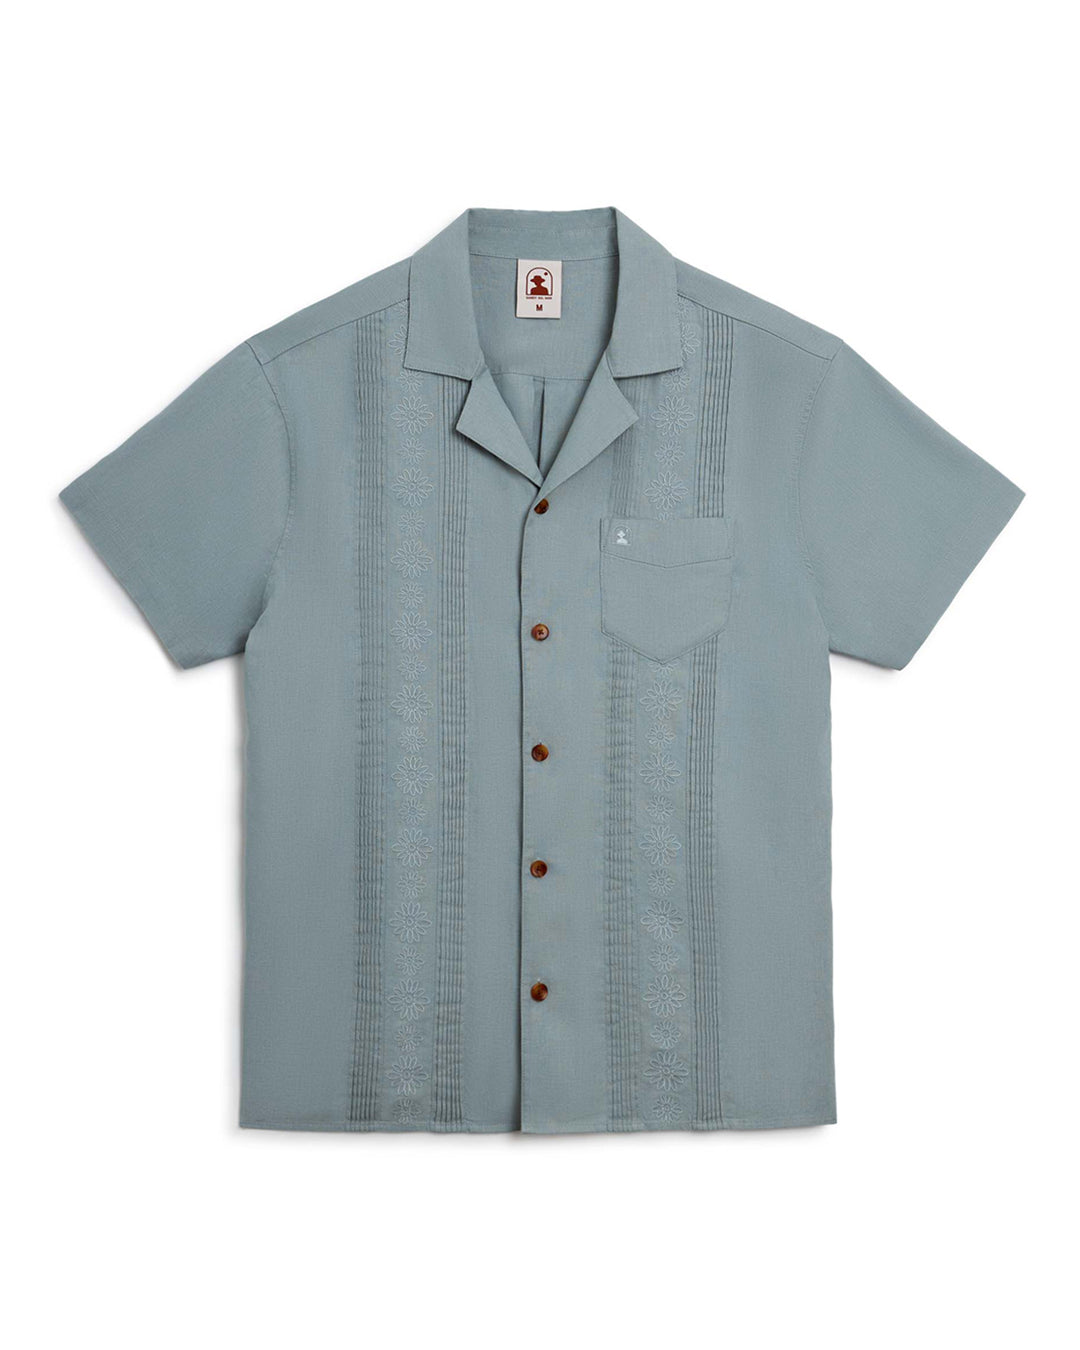 The Abalone Linen Shirt, a men's hawaiian shirt in light blue, with signature gardenia floral embroidery and coconut shell buttons, from Dandy Del Mar.